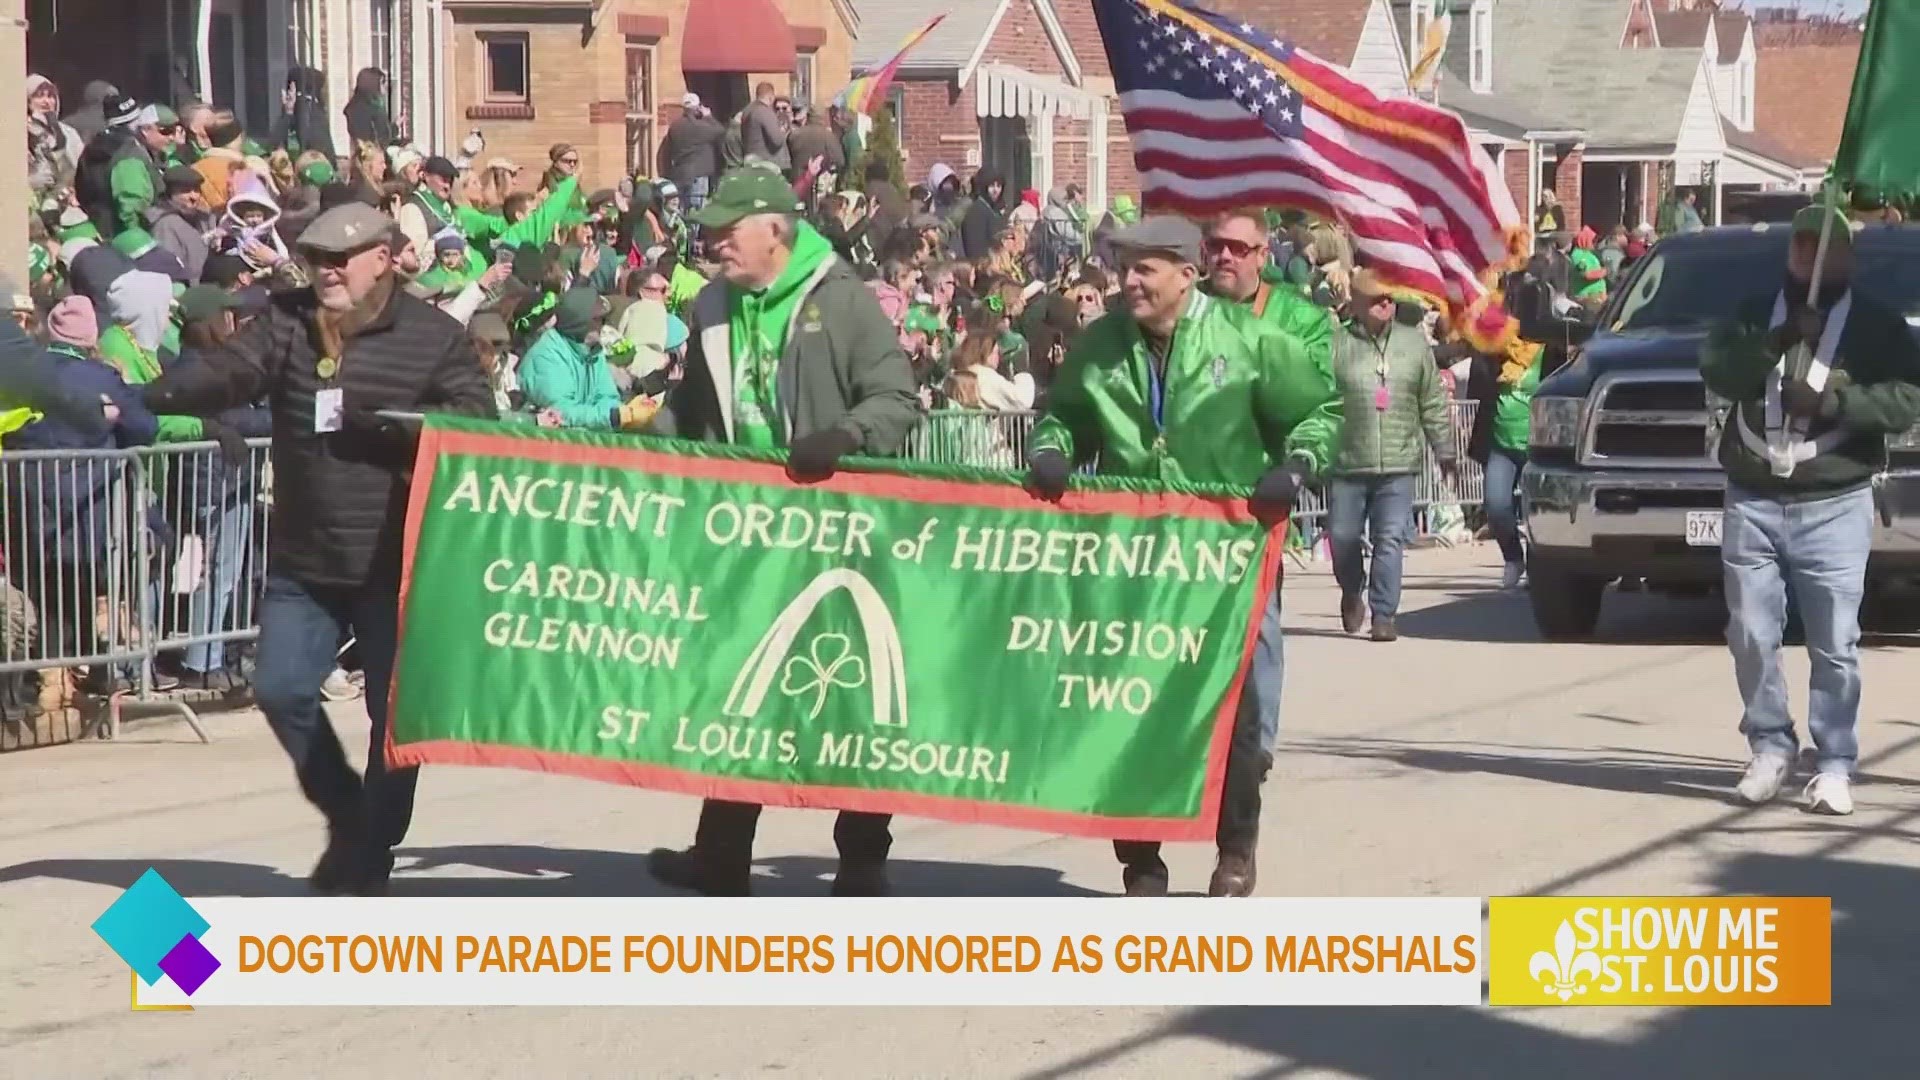 Jim Sheerin, Tim Wiese and Jim Mohan, will be honored as Grand Marshals of the 2024 parade.